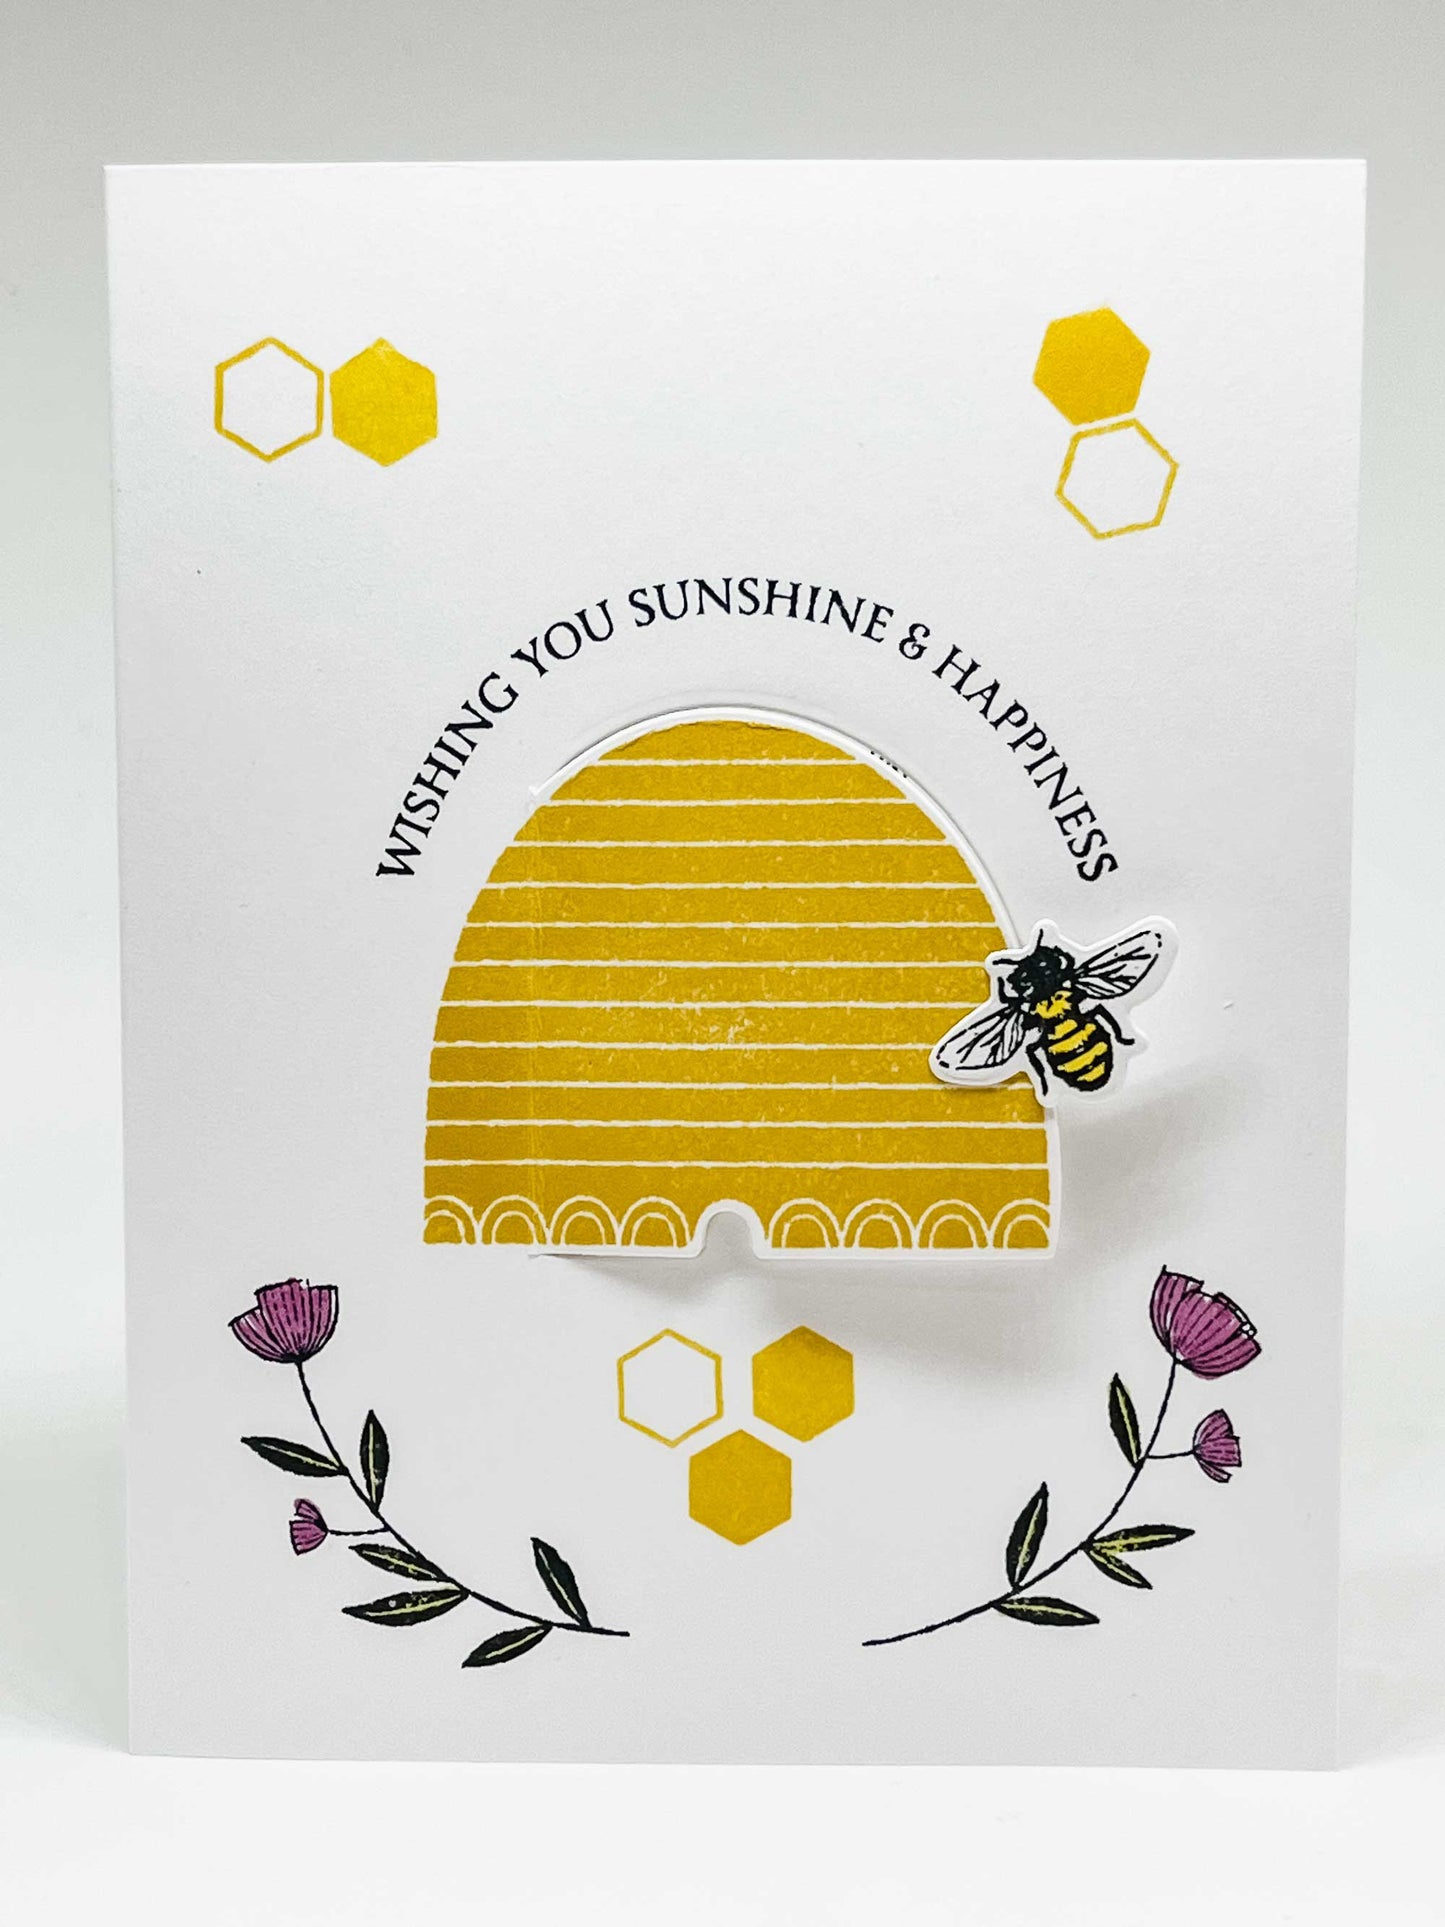 Pop-up greeting card with 2 flowers, a honeybee on a hive, and text that wishing you sunshine & happiness